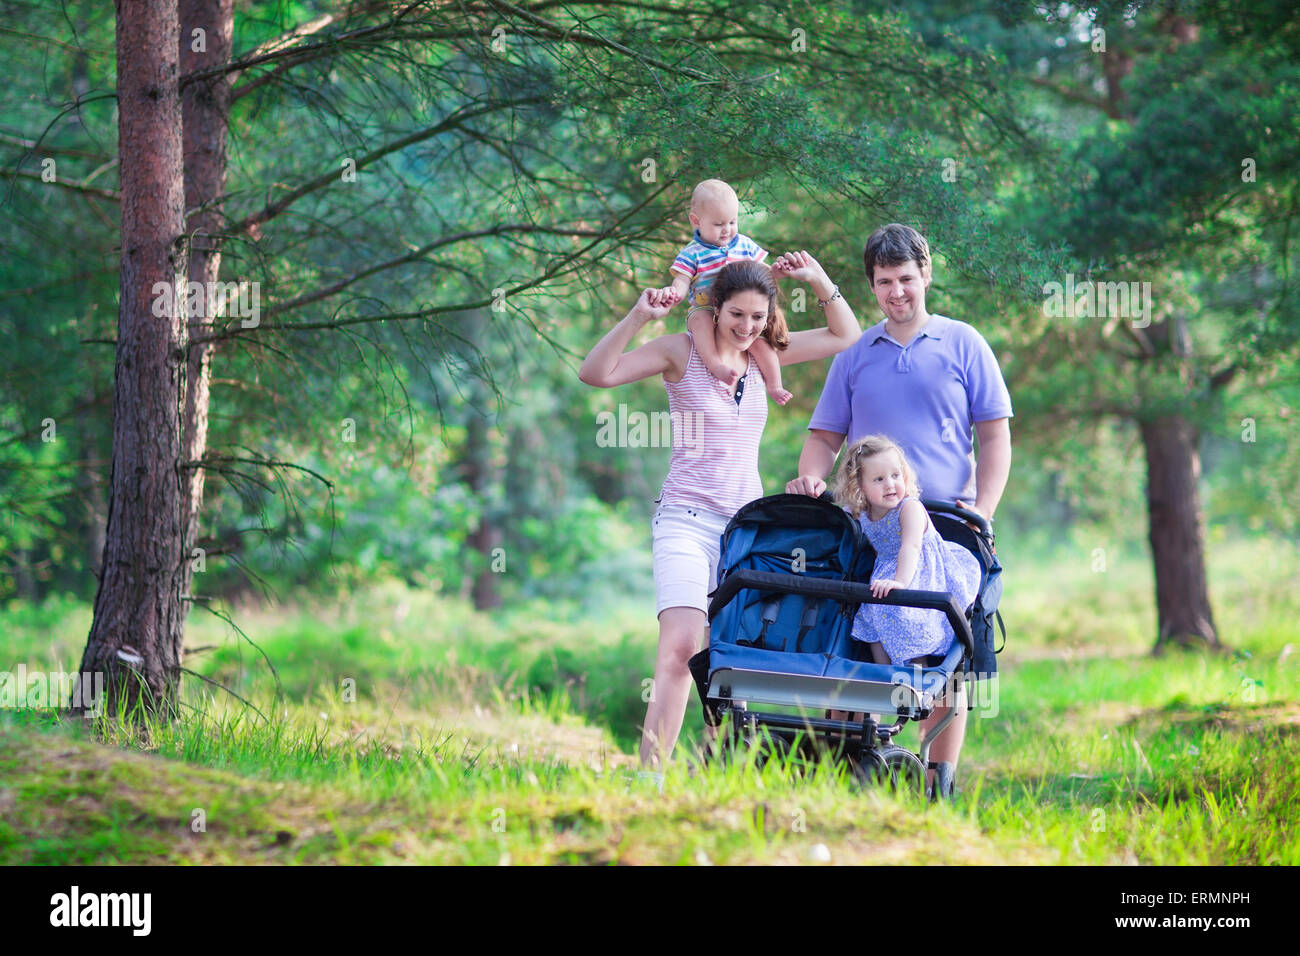 Active family, young parents and their two little children, hiking together in pine forest pushing an all terrain twin stroller Stock Photo